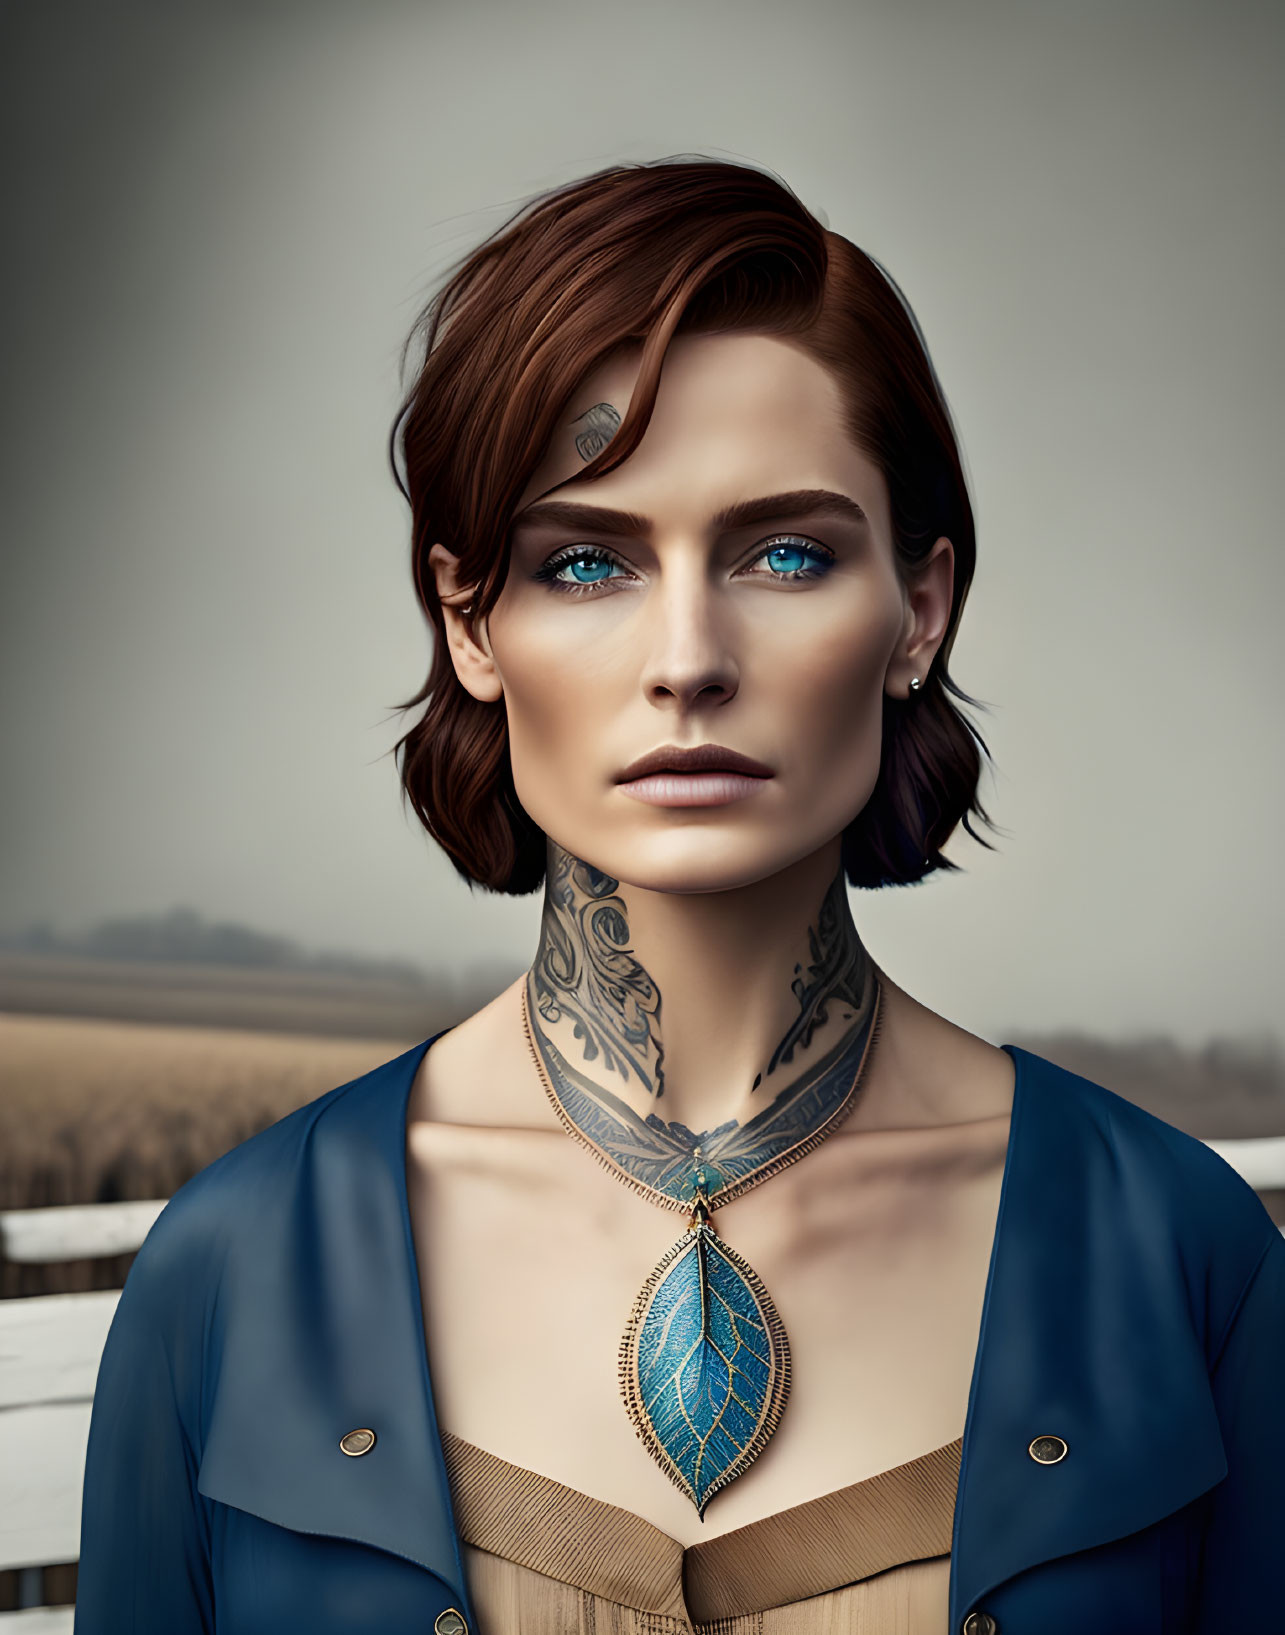 Digital portrait of woman with short brown hair, blue eyes, neck tattoo, and pendant in rural setting